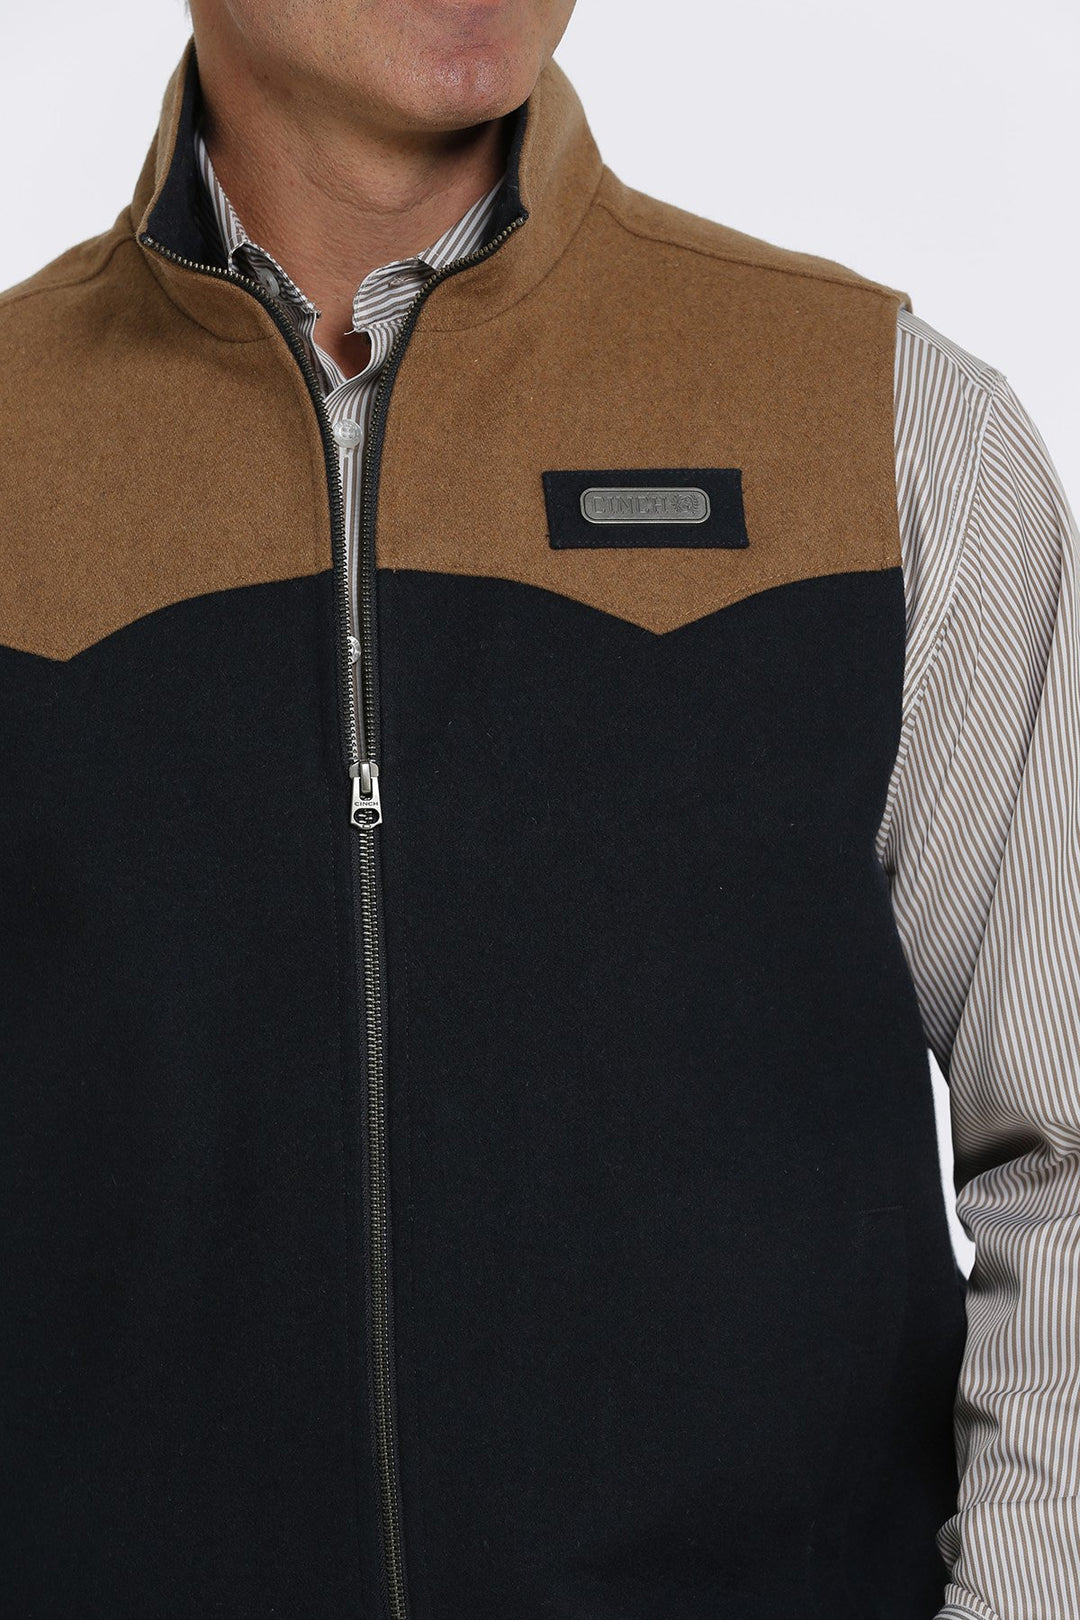 Cinch Men's Navy and Tan Wooly Concealed Carry Vest